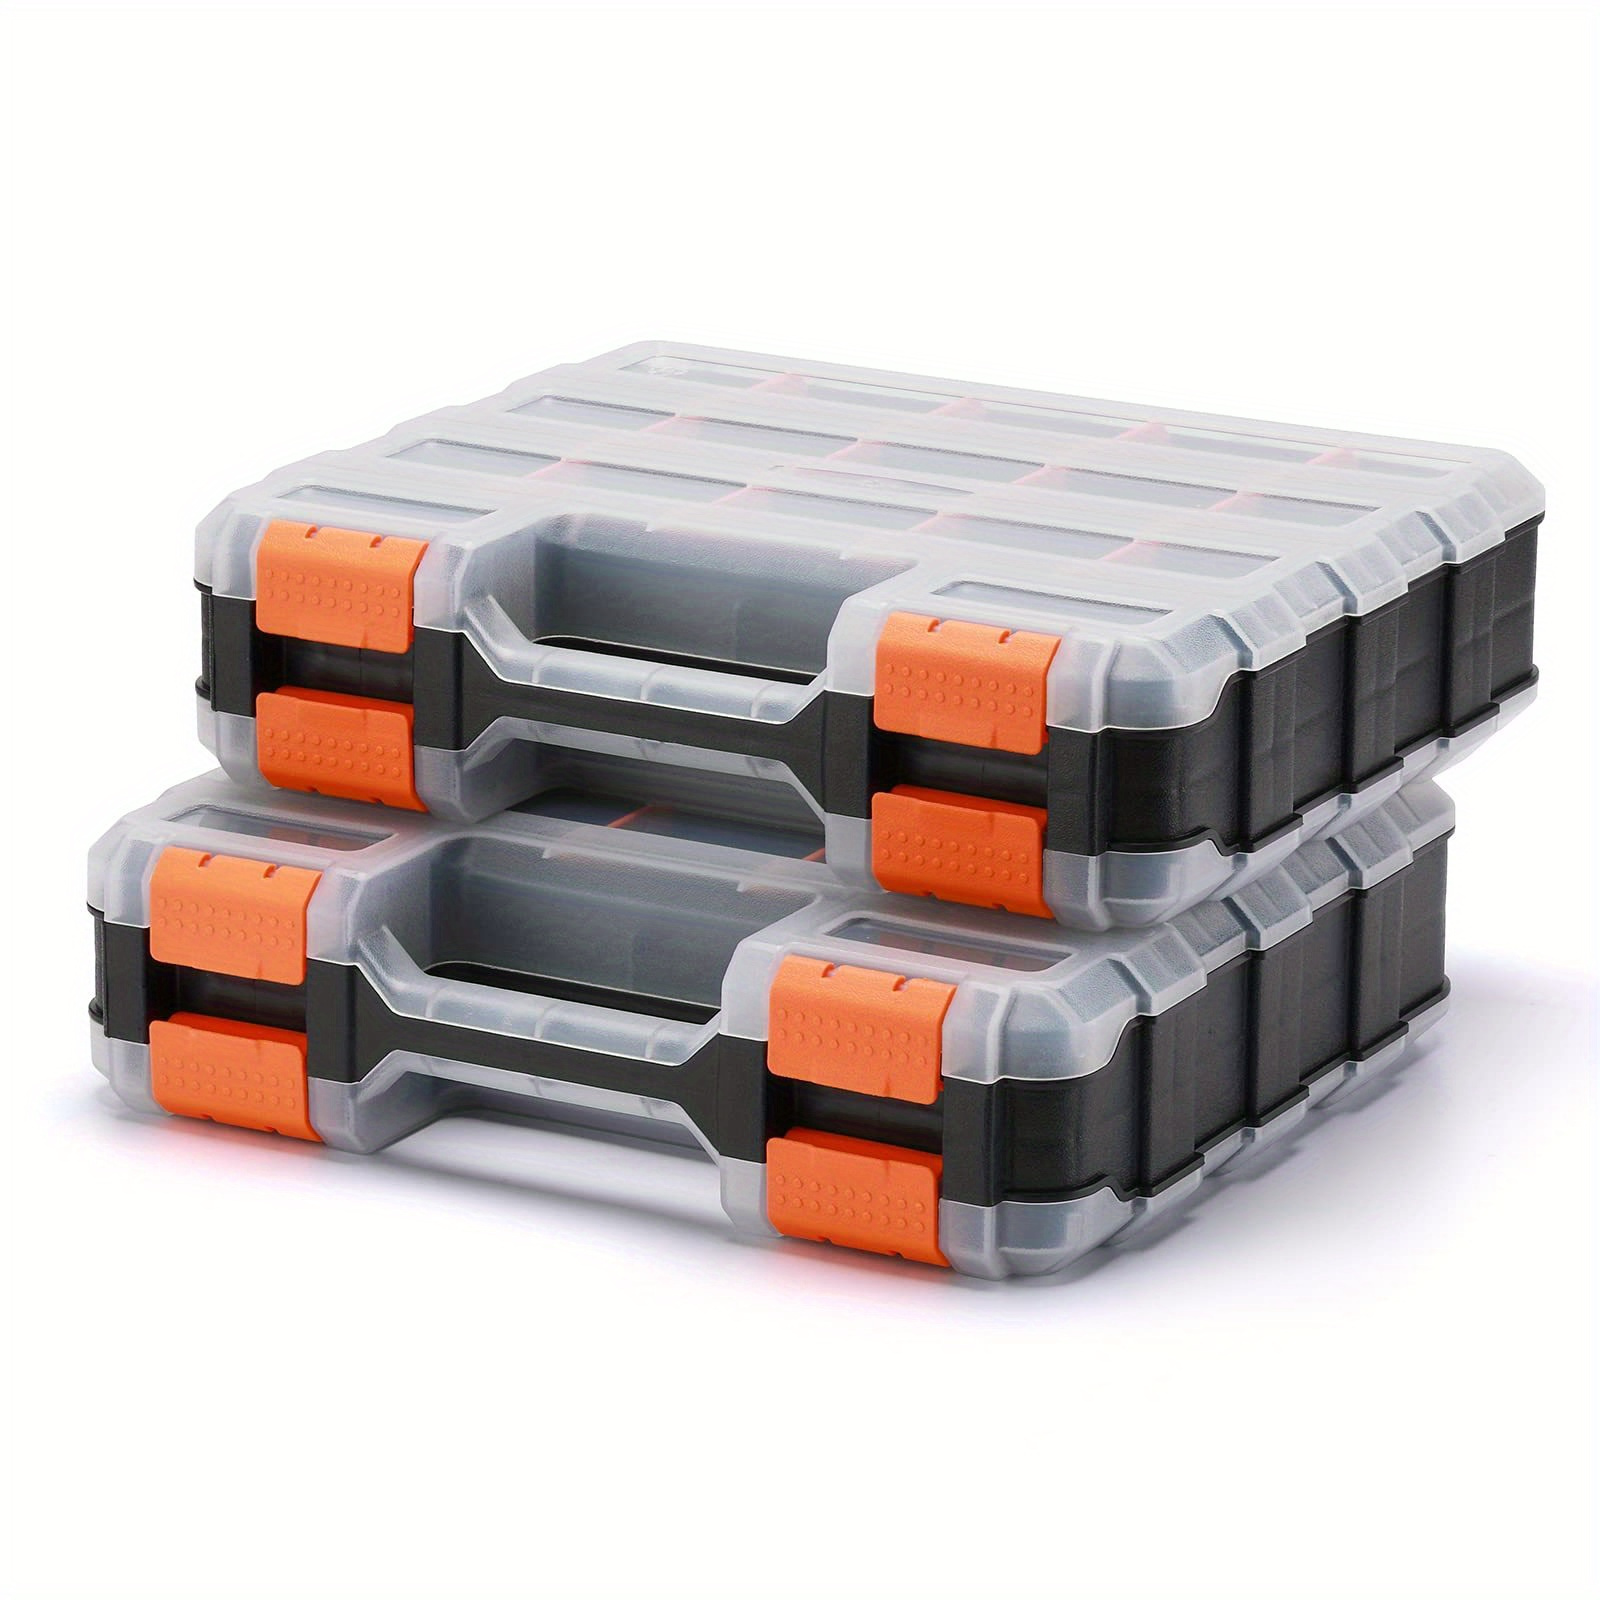 

1/2pcs Double-sided Tool Organizer Box With Customizable Removable Dividers, 34-compartment, Durable Plastic Hardware Storage For Screws, Nuts, Small Parts, Black & Orange